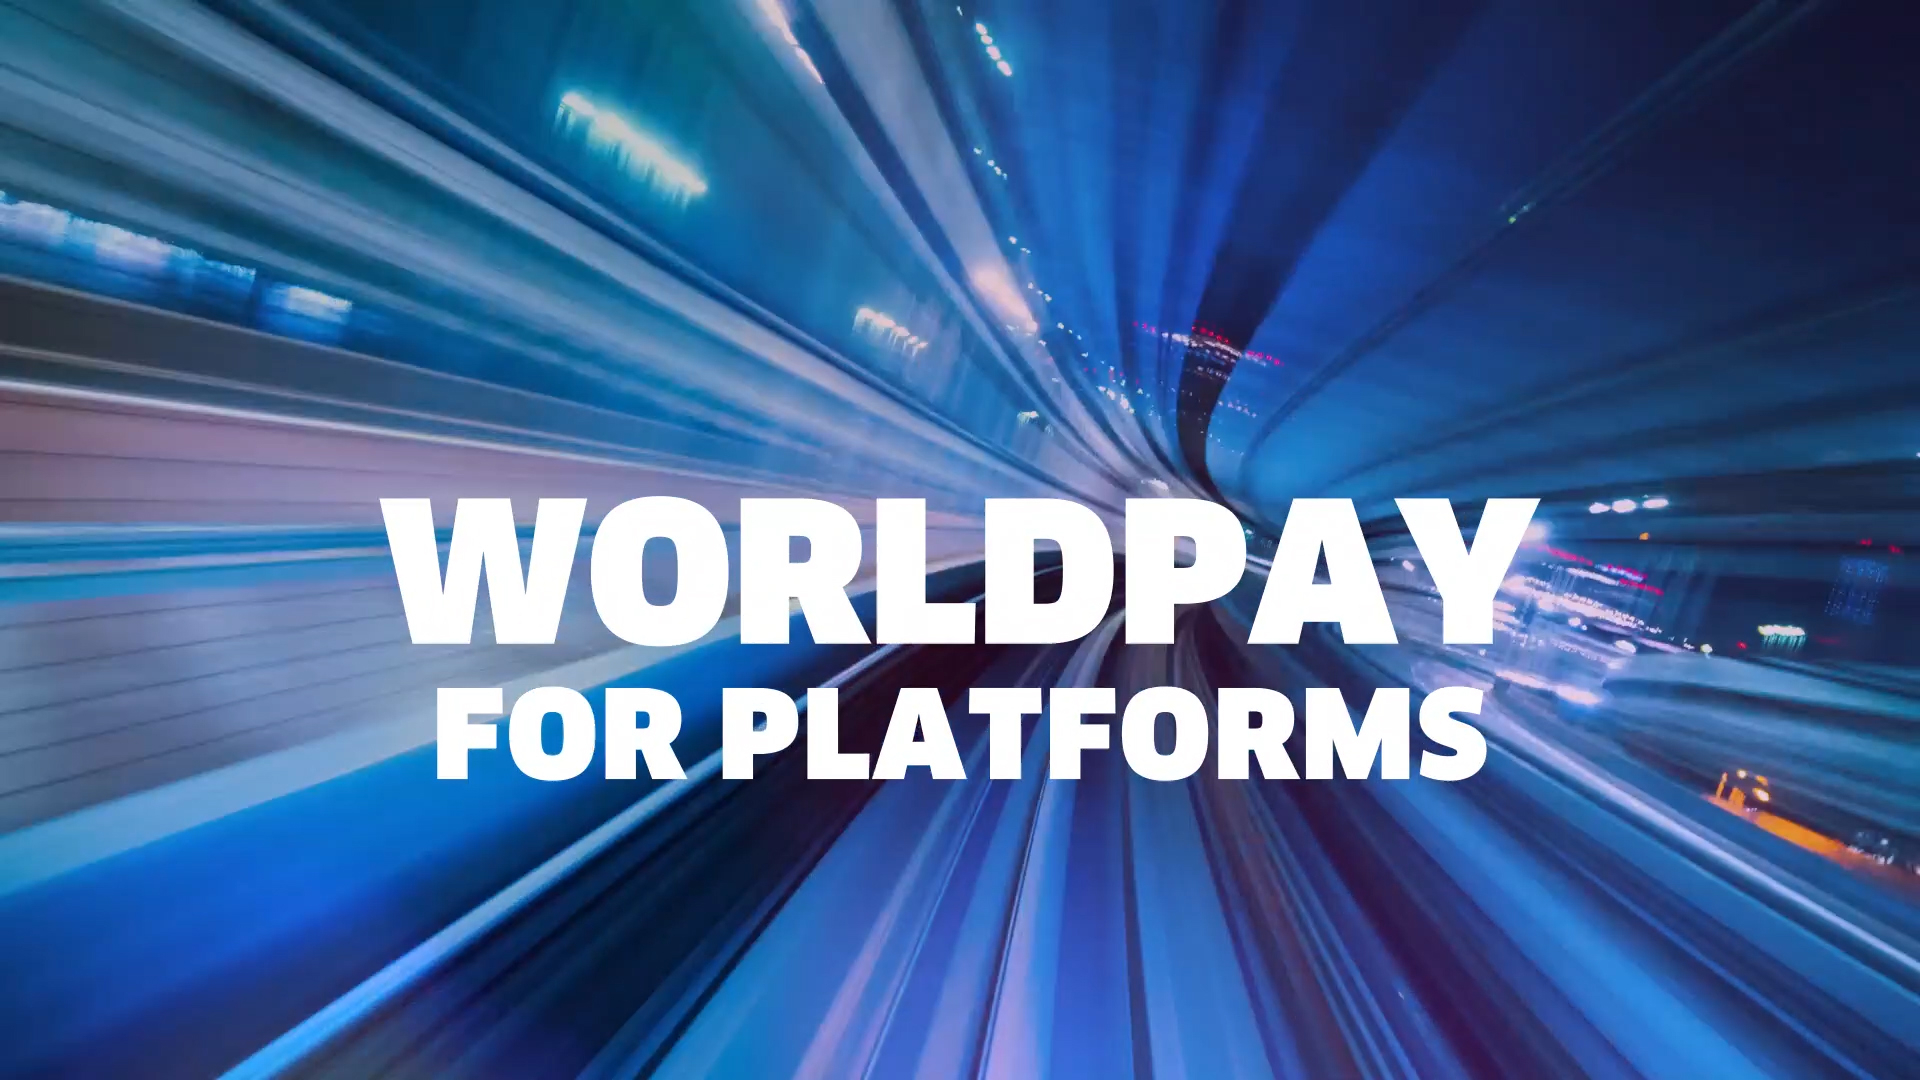 Worldpay for Platforms helps consumers pay for what they want and allows small-to-medium-sized businesses (SMBs) to get paid. Through this solution, software companies are now able give SMBs access to embedded payments and finance solutions from one of the world’s largest payment processors in Worldpay from FIS®.